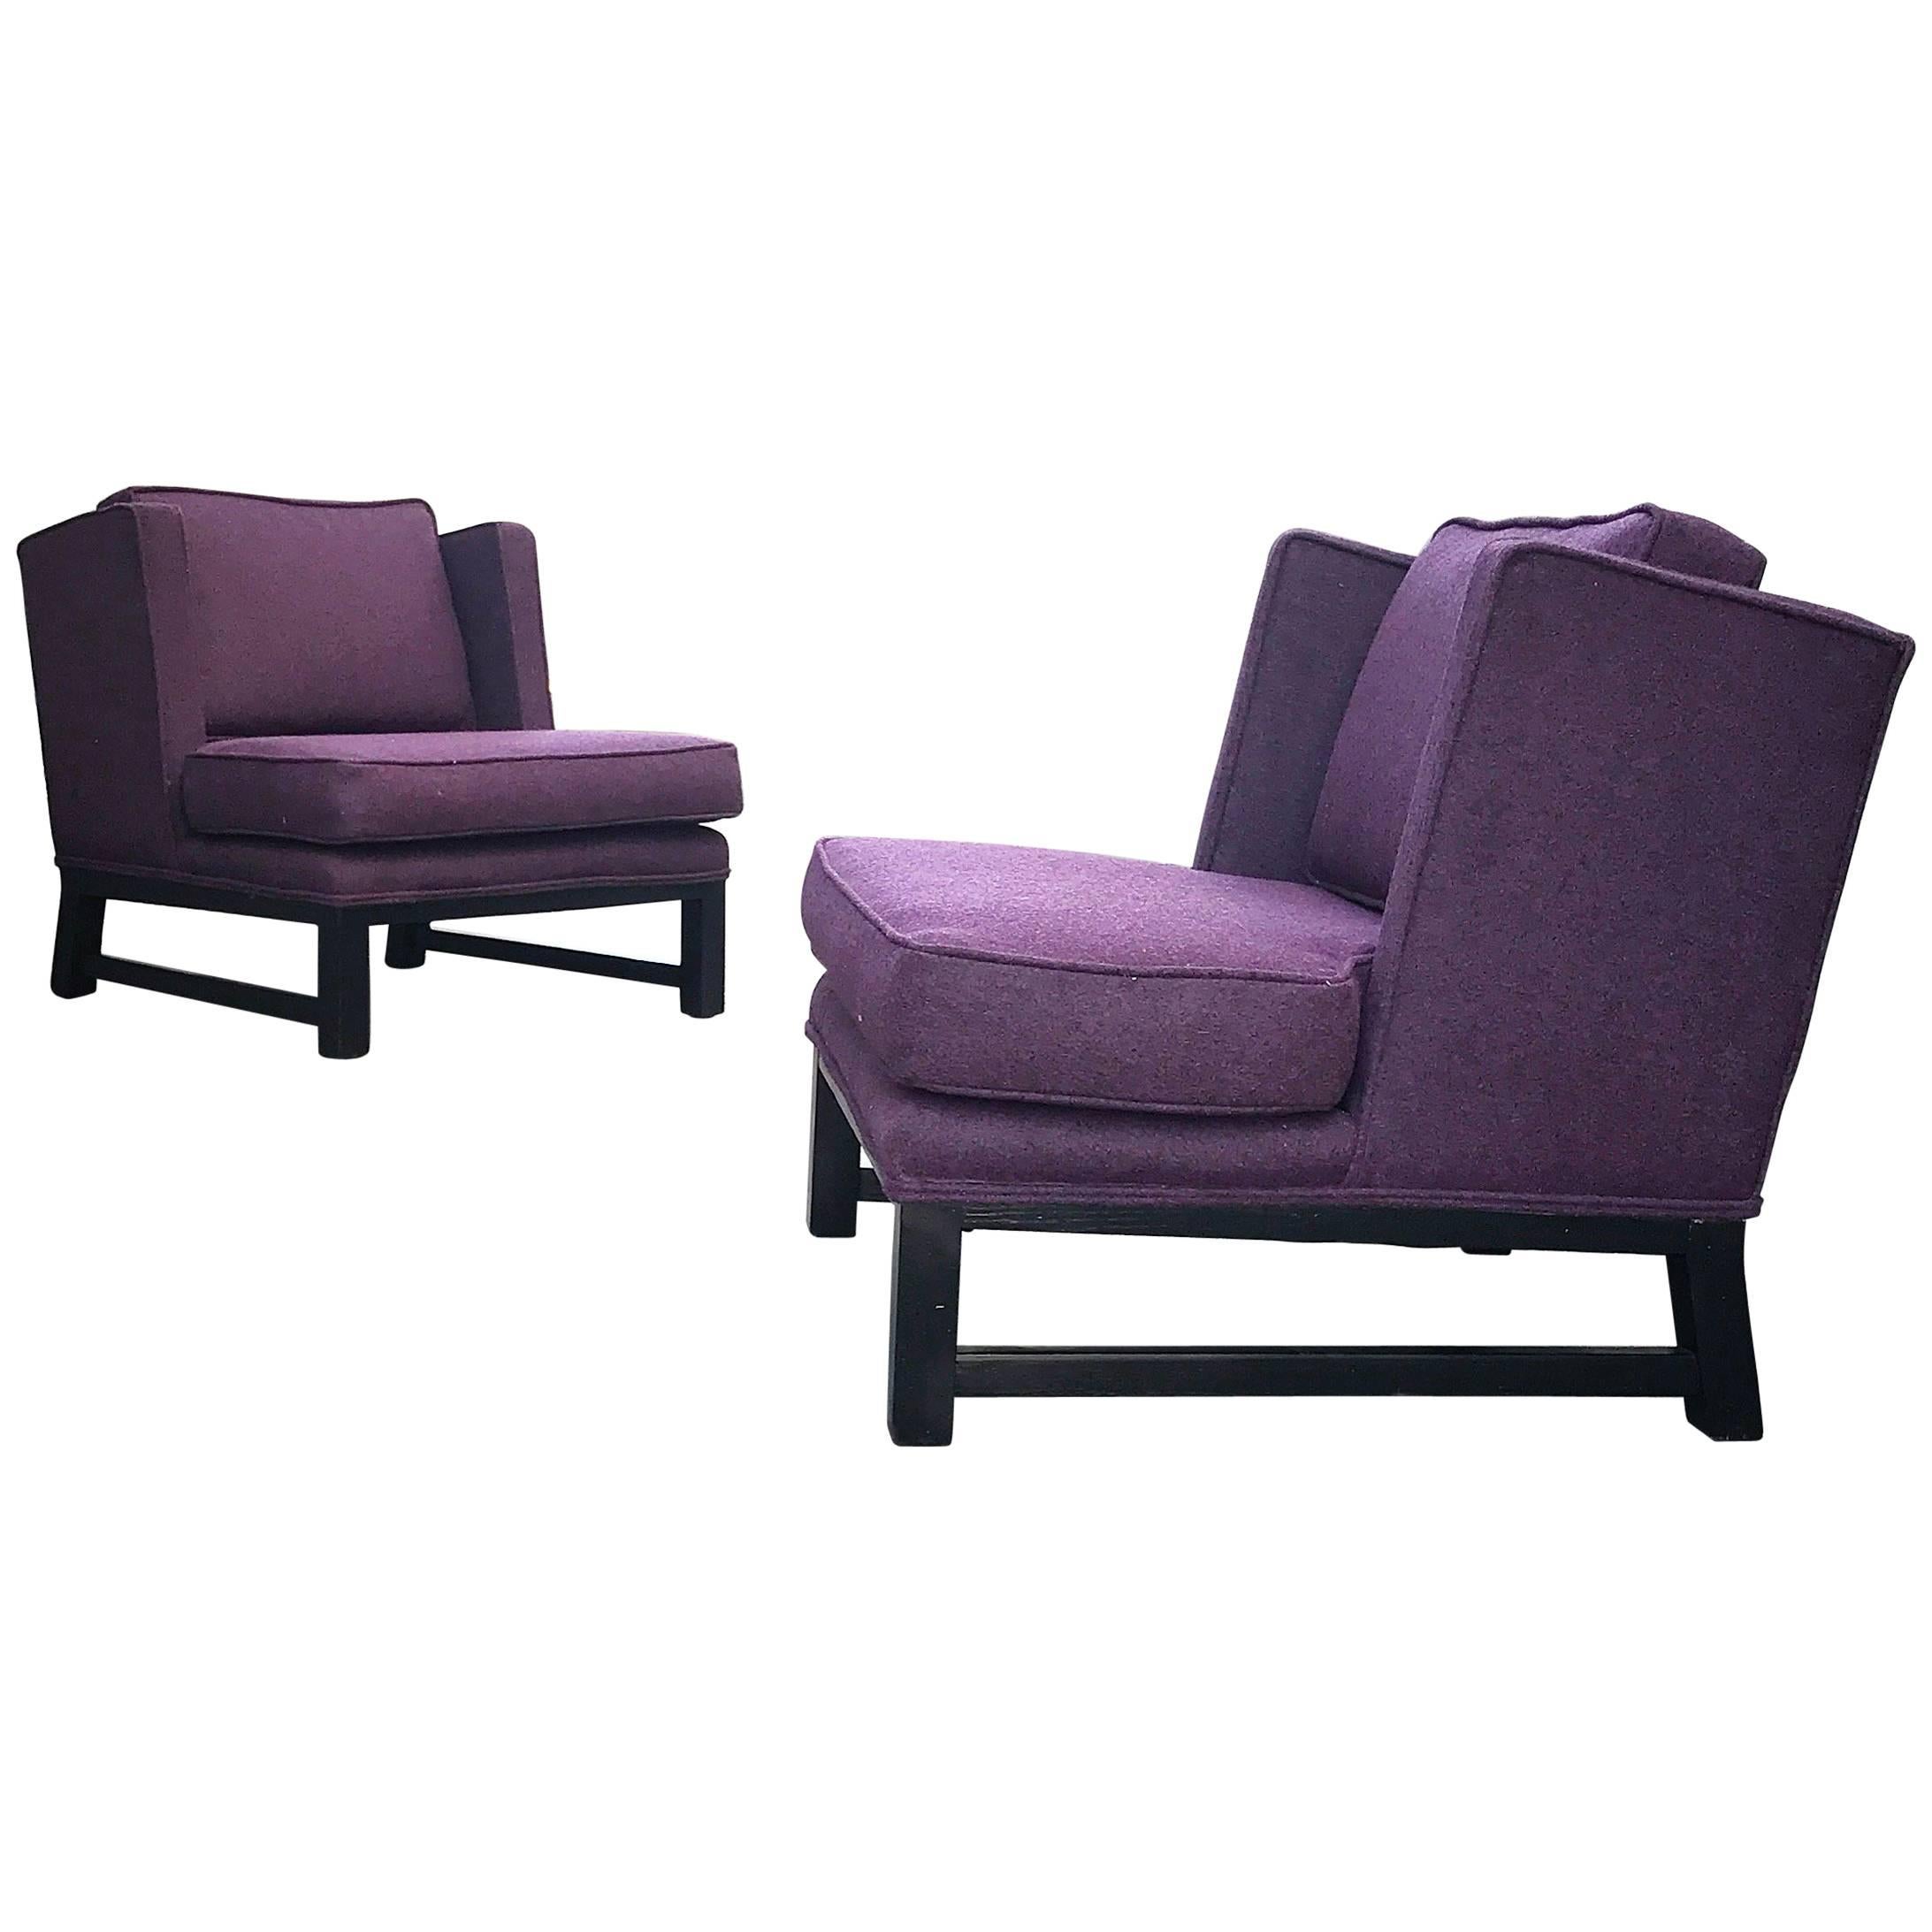 Pair of Lounge Chairs in Maharam Wool Reminiscent of Dunbar Designs For Sale